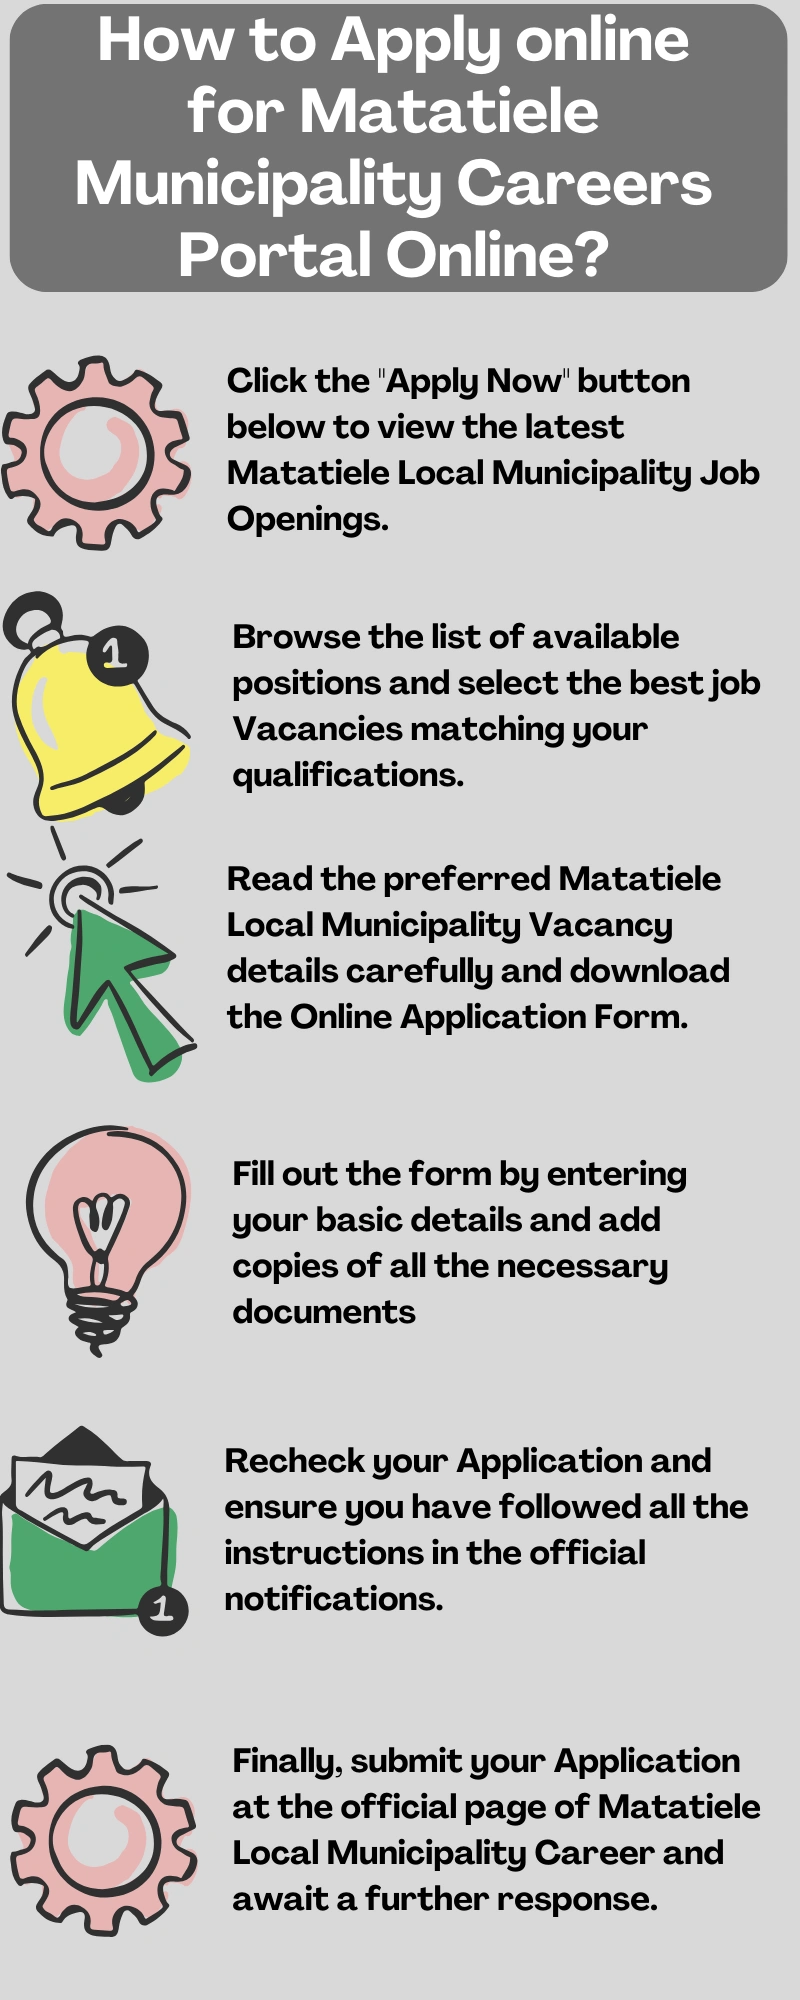 How to Apply online for Matatiele Municipality Careers Portal Online?